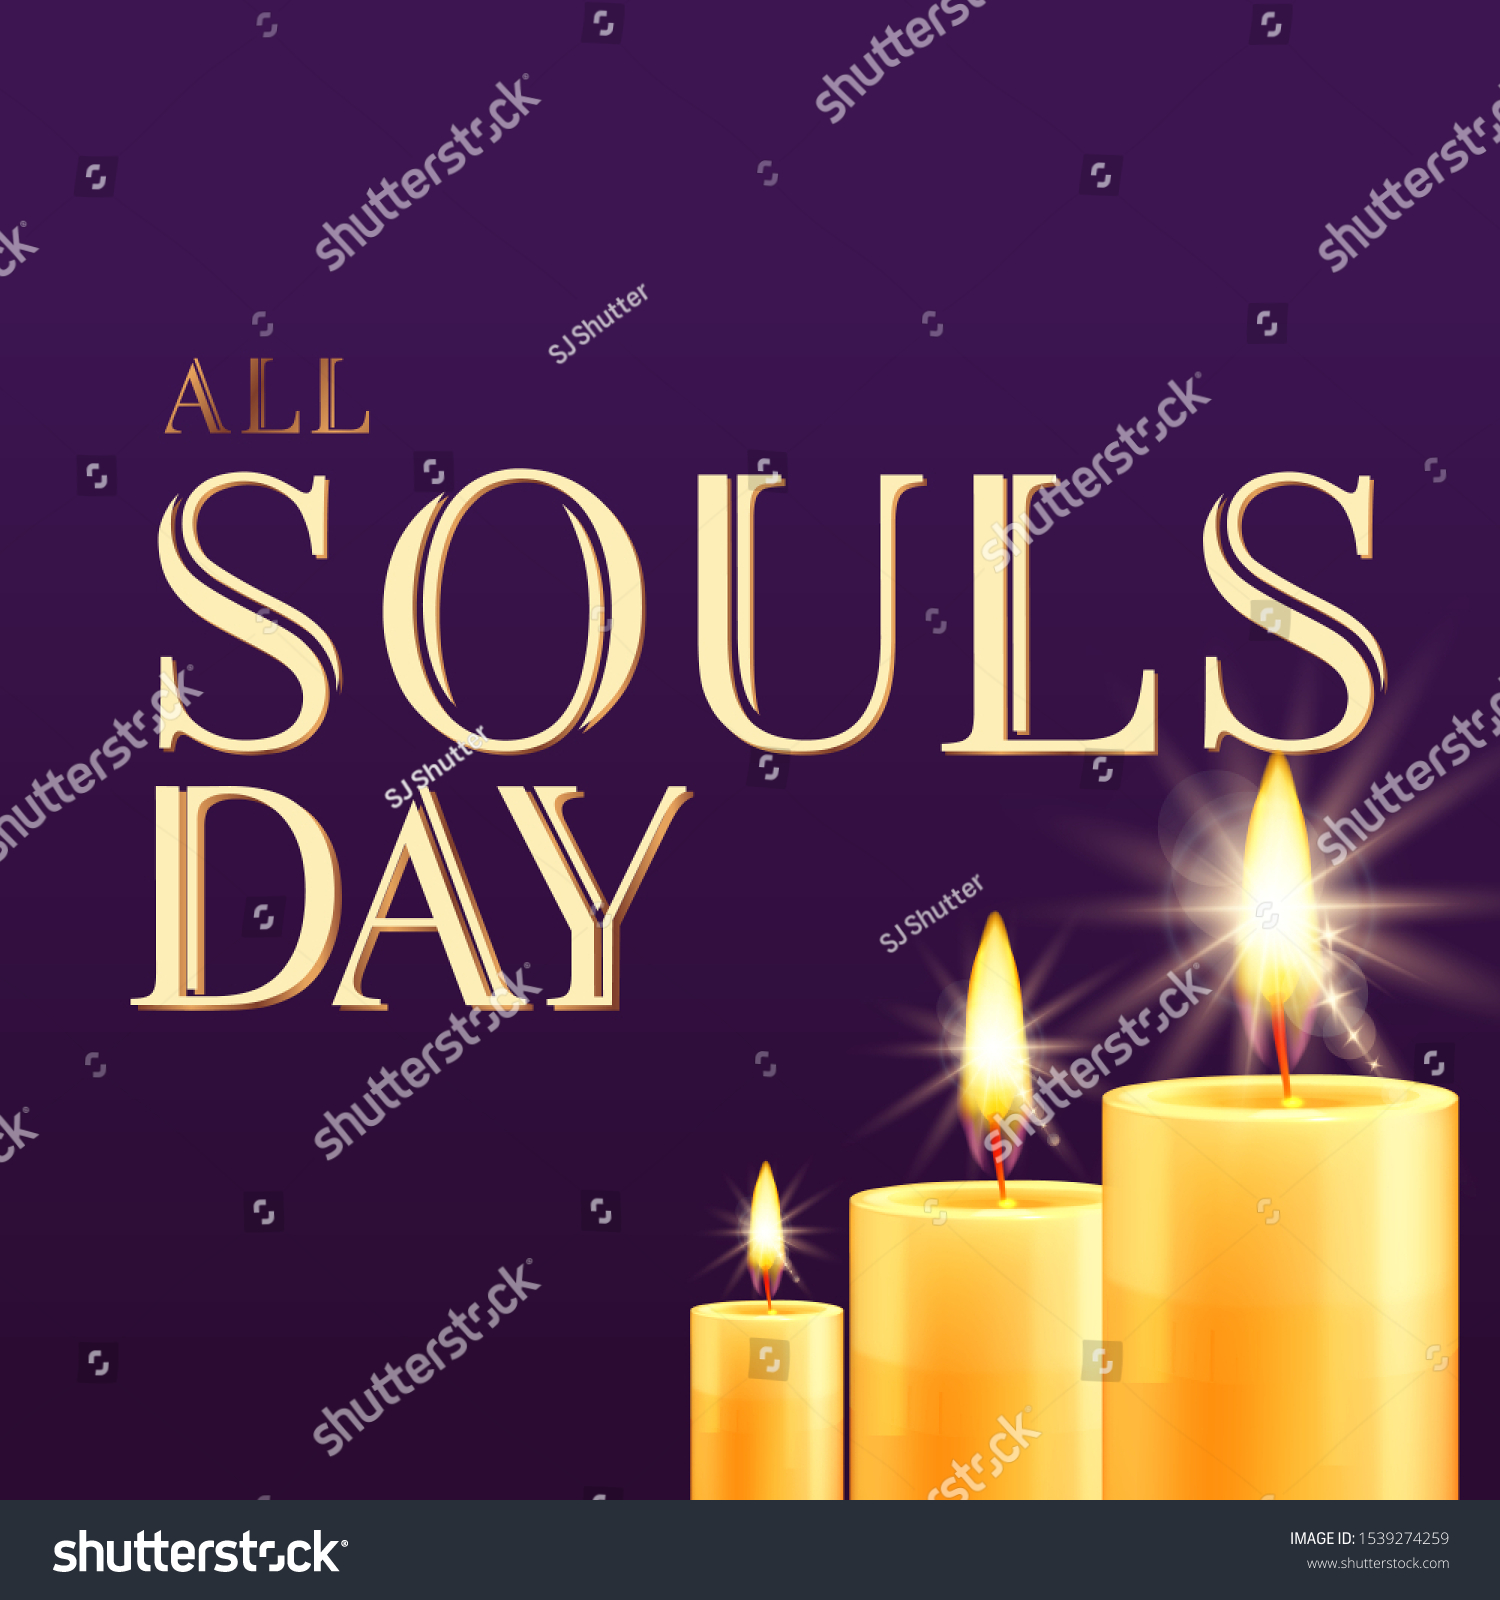 6,244 All souls day Images, Stock Photos & Vectors Shutterstock